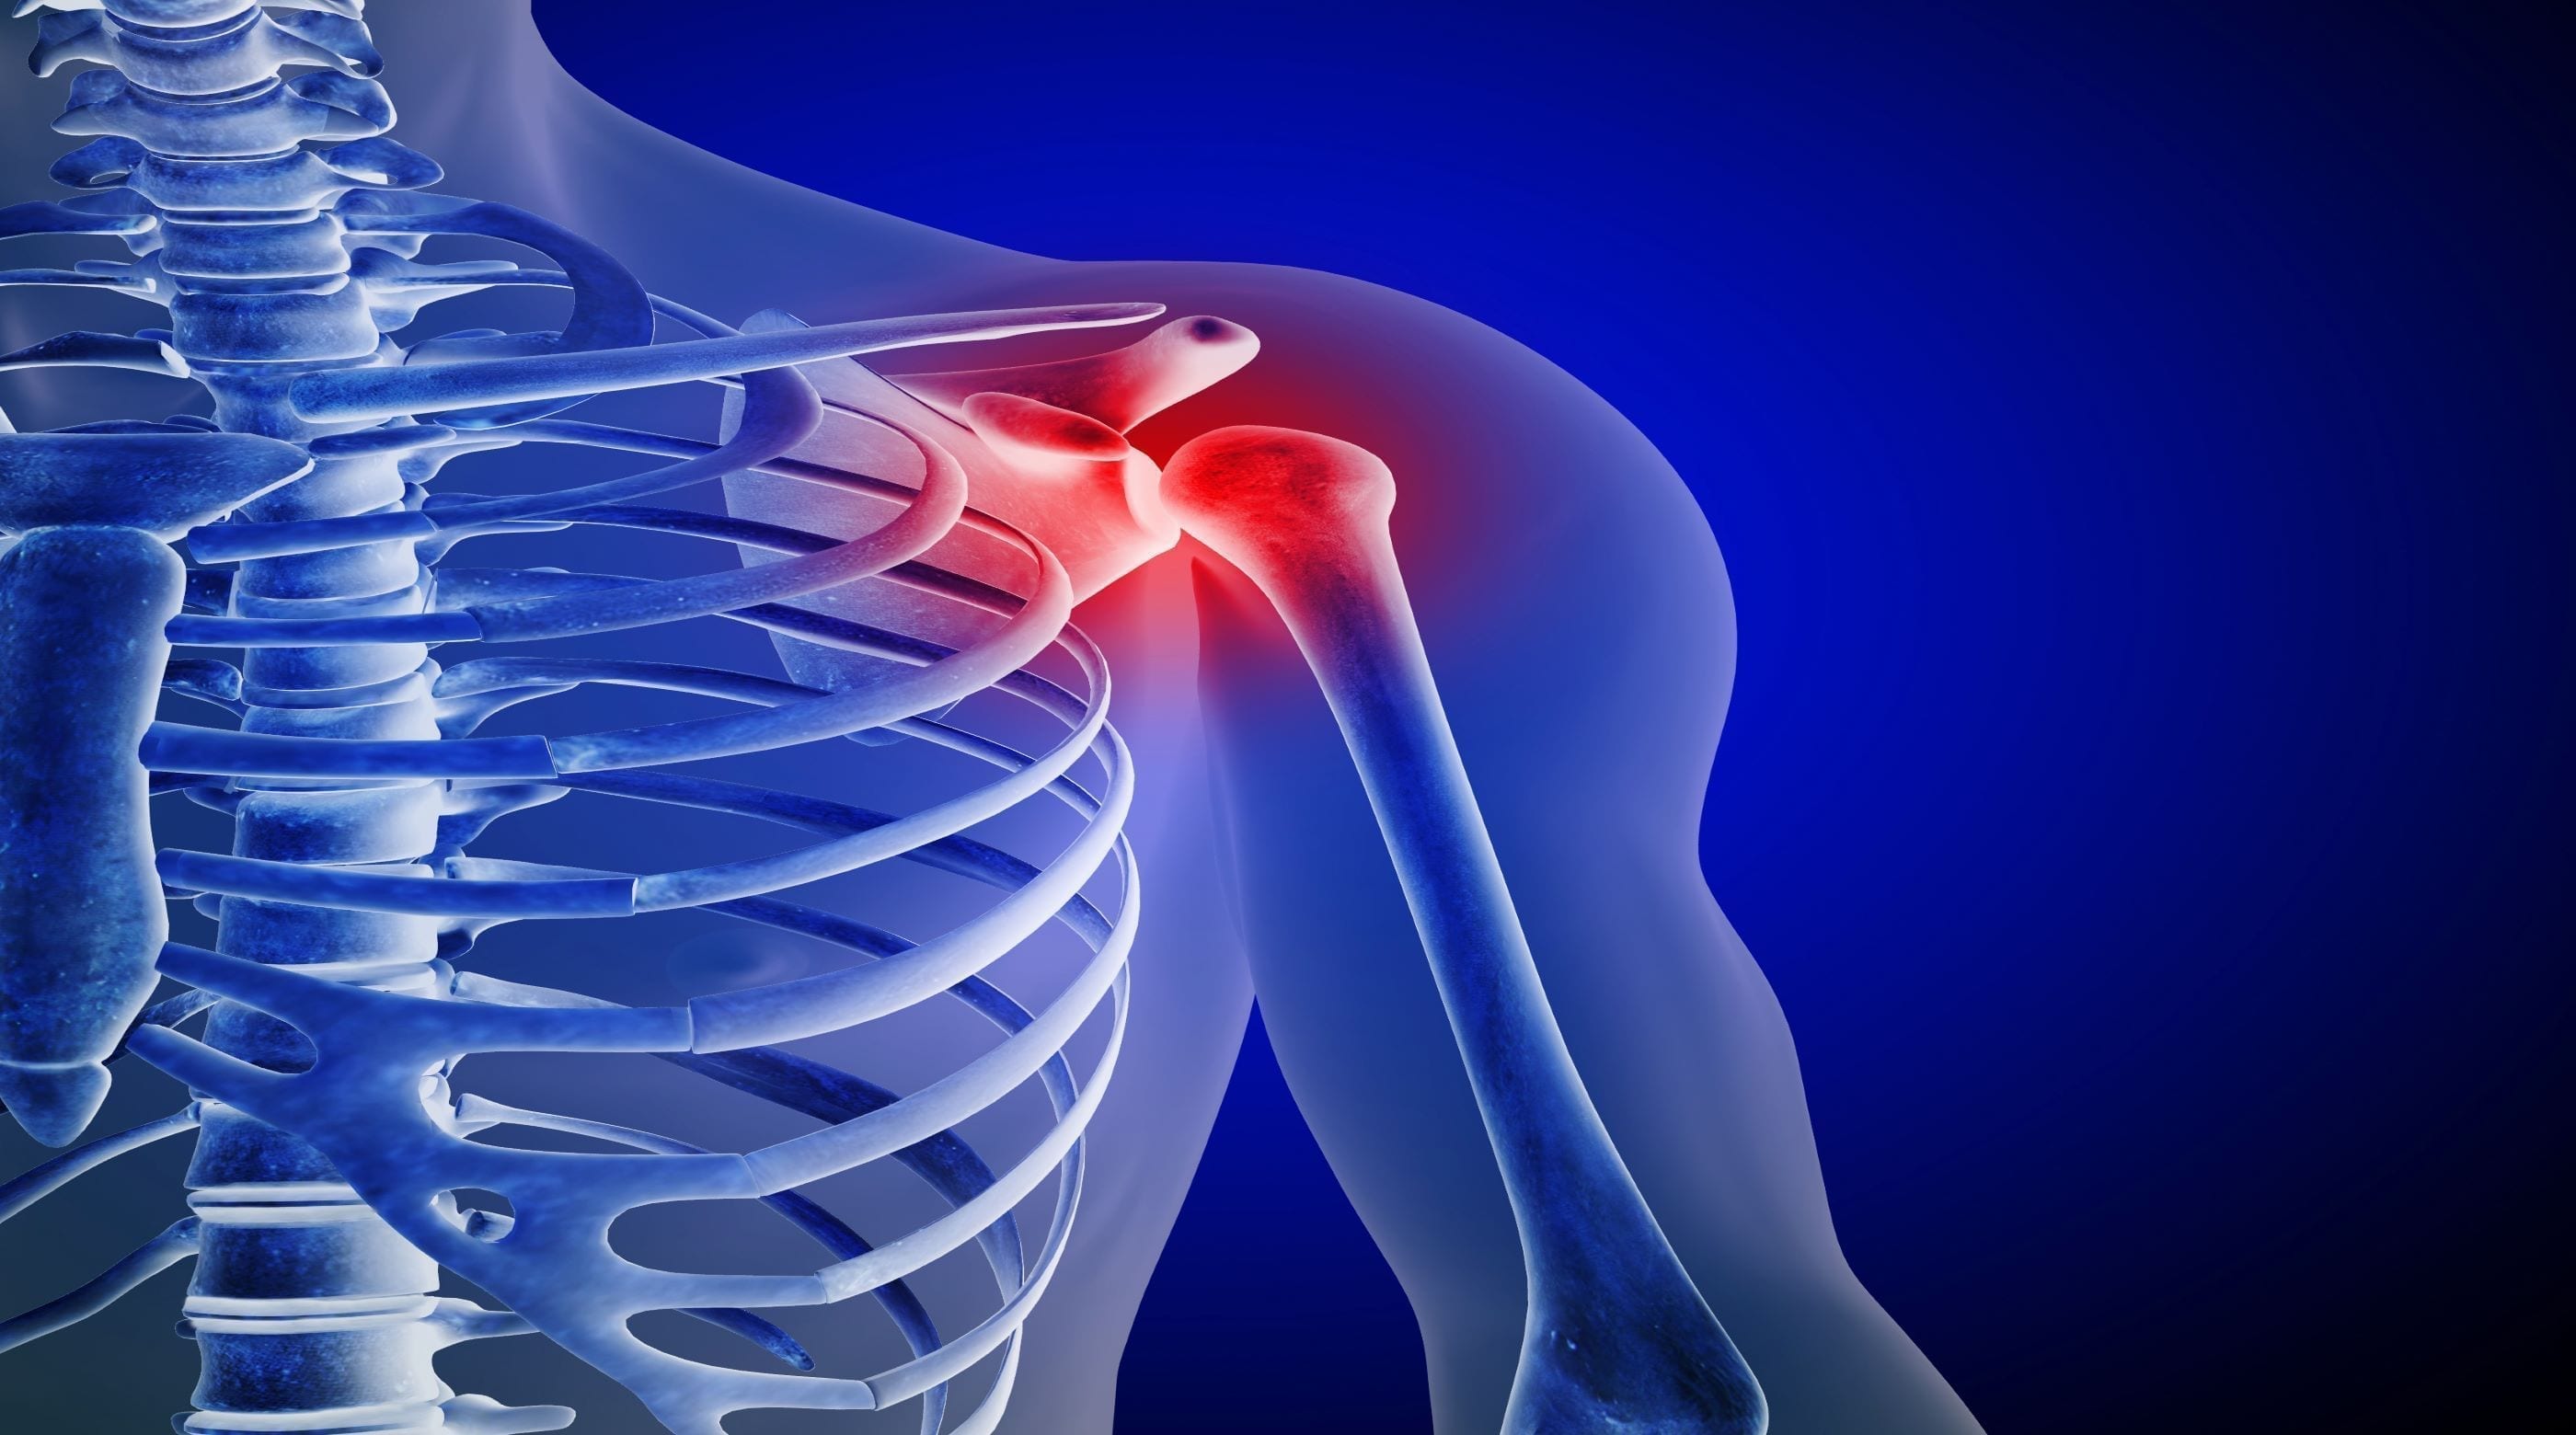 Learn Why Shoulder Impingement is Not the Rotator Cuff’s Fault